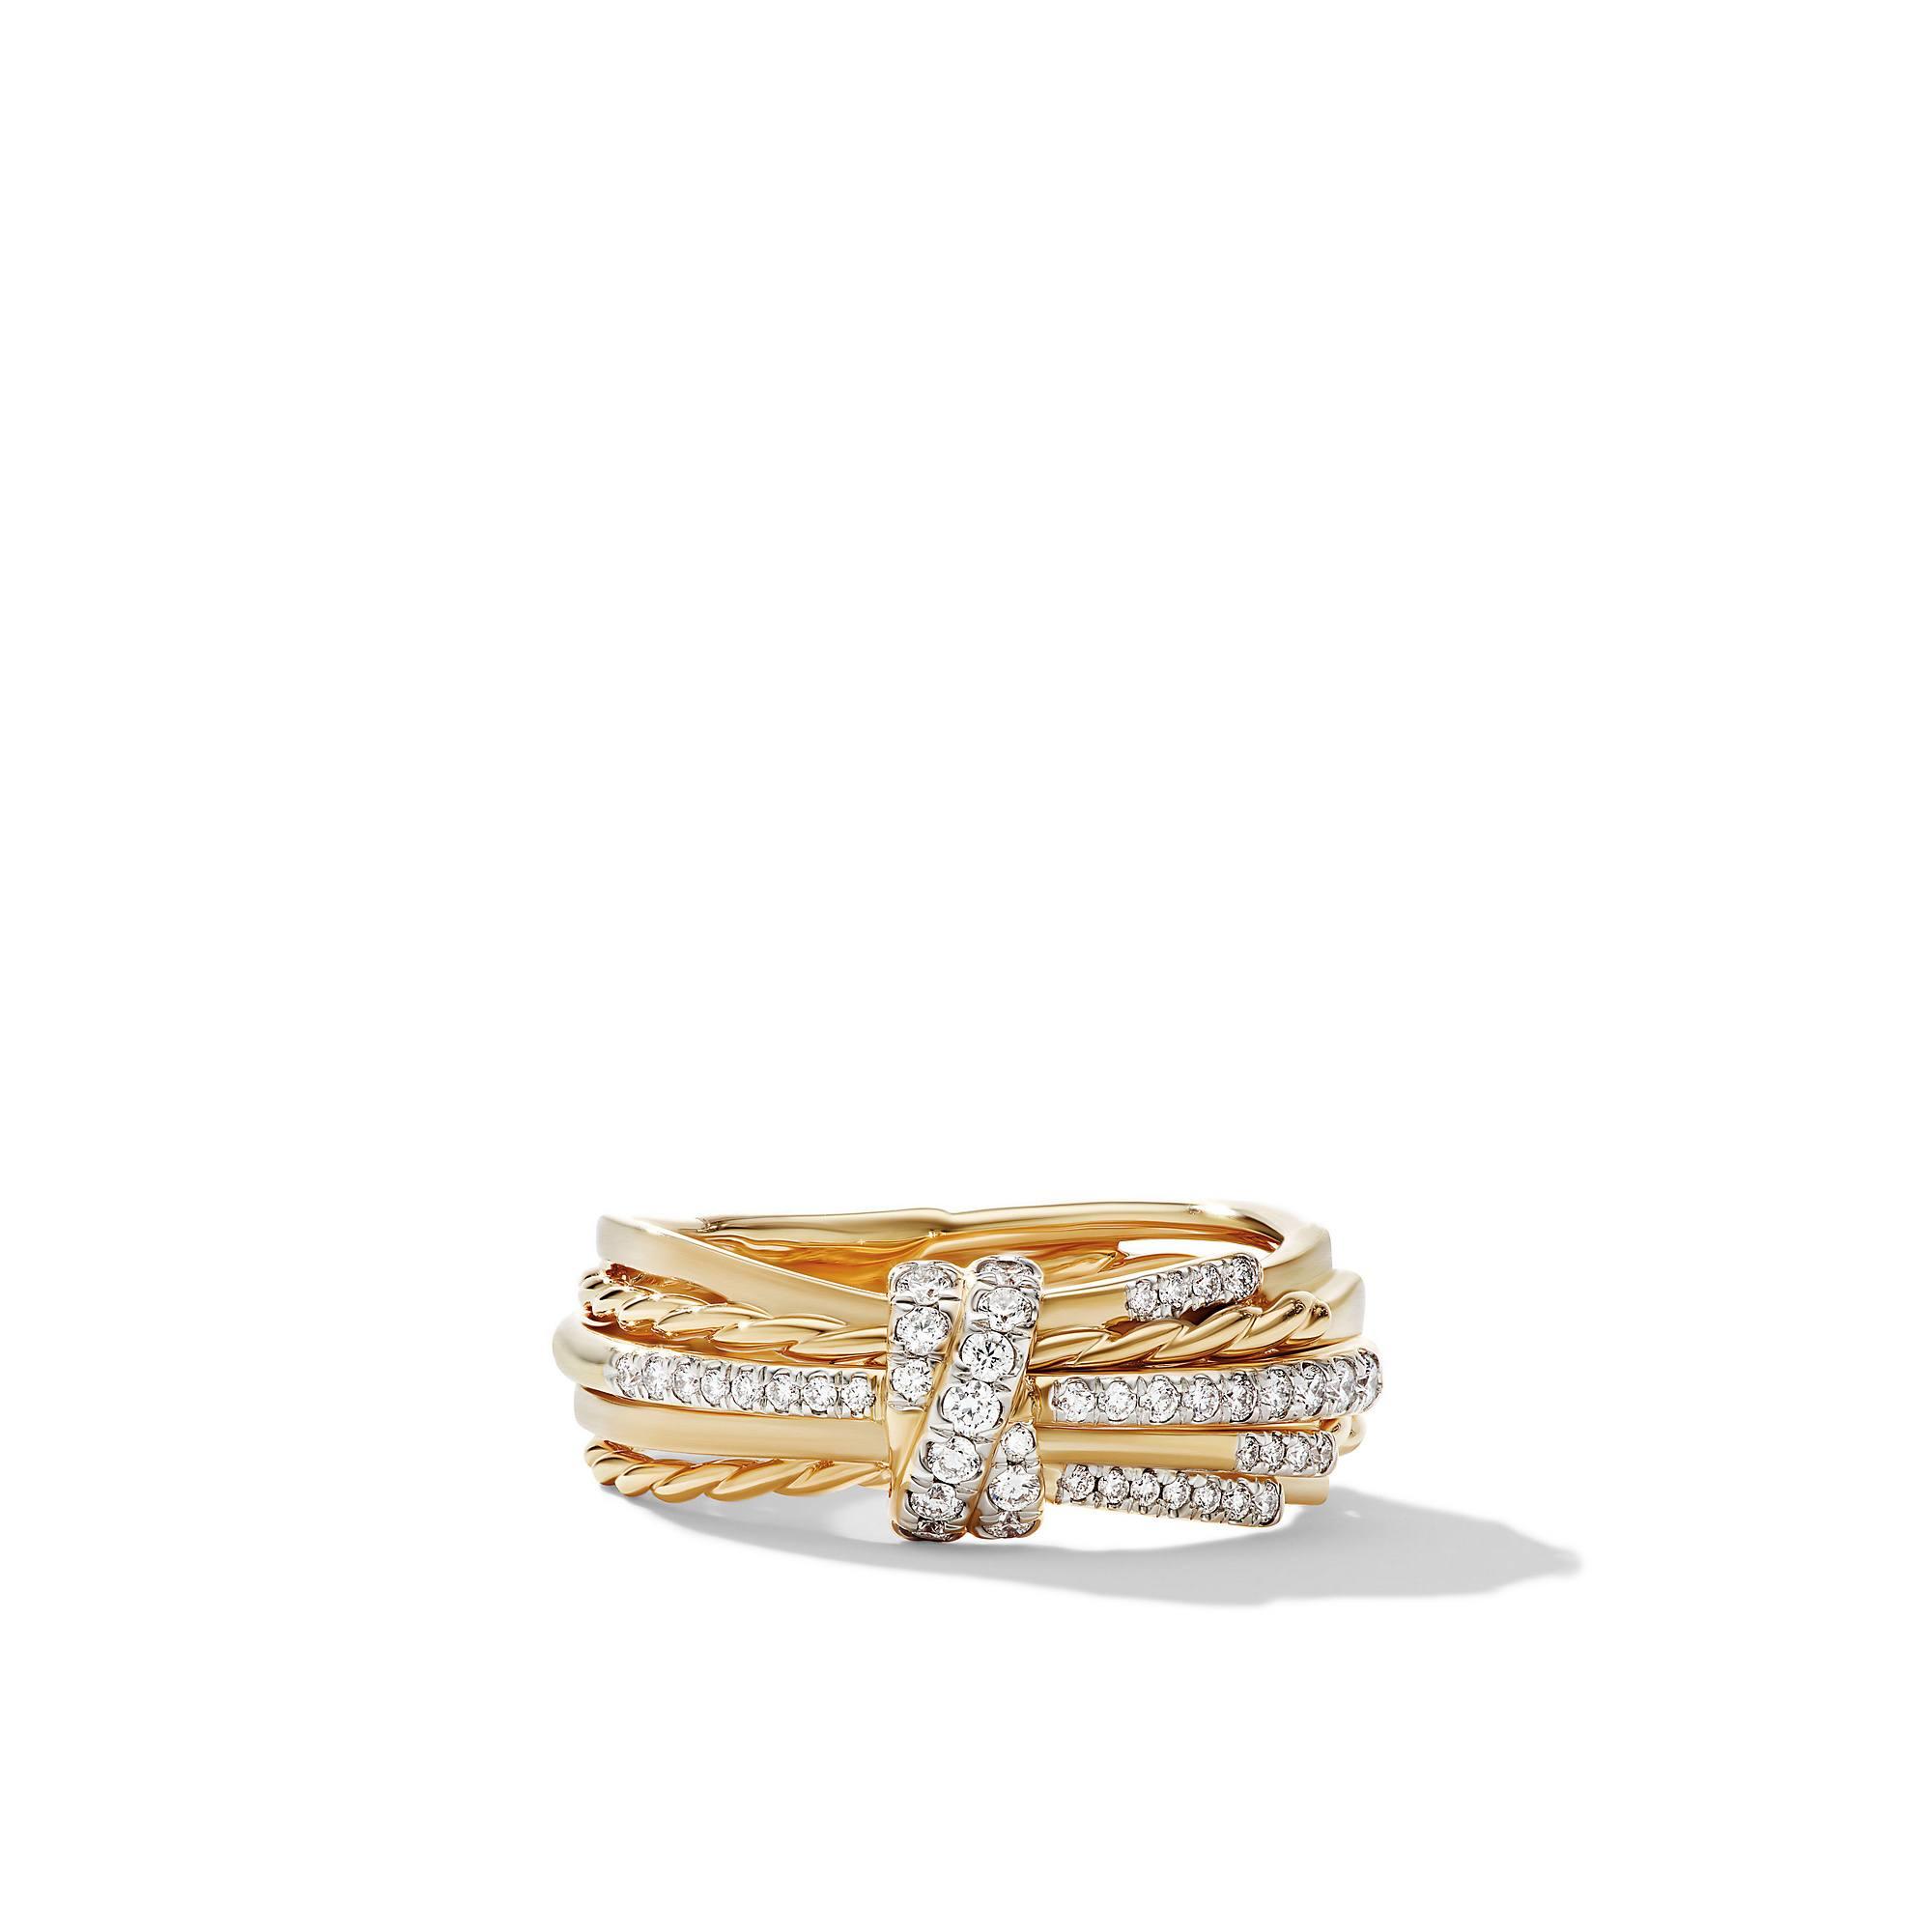 David Yurman Angelika Ring in 18K Yellow Gold with Pave Diamonds, 7.5mm in width, size 6